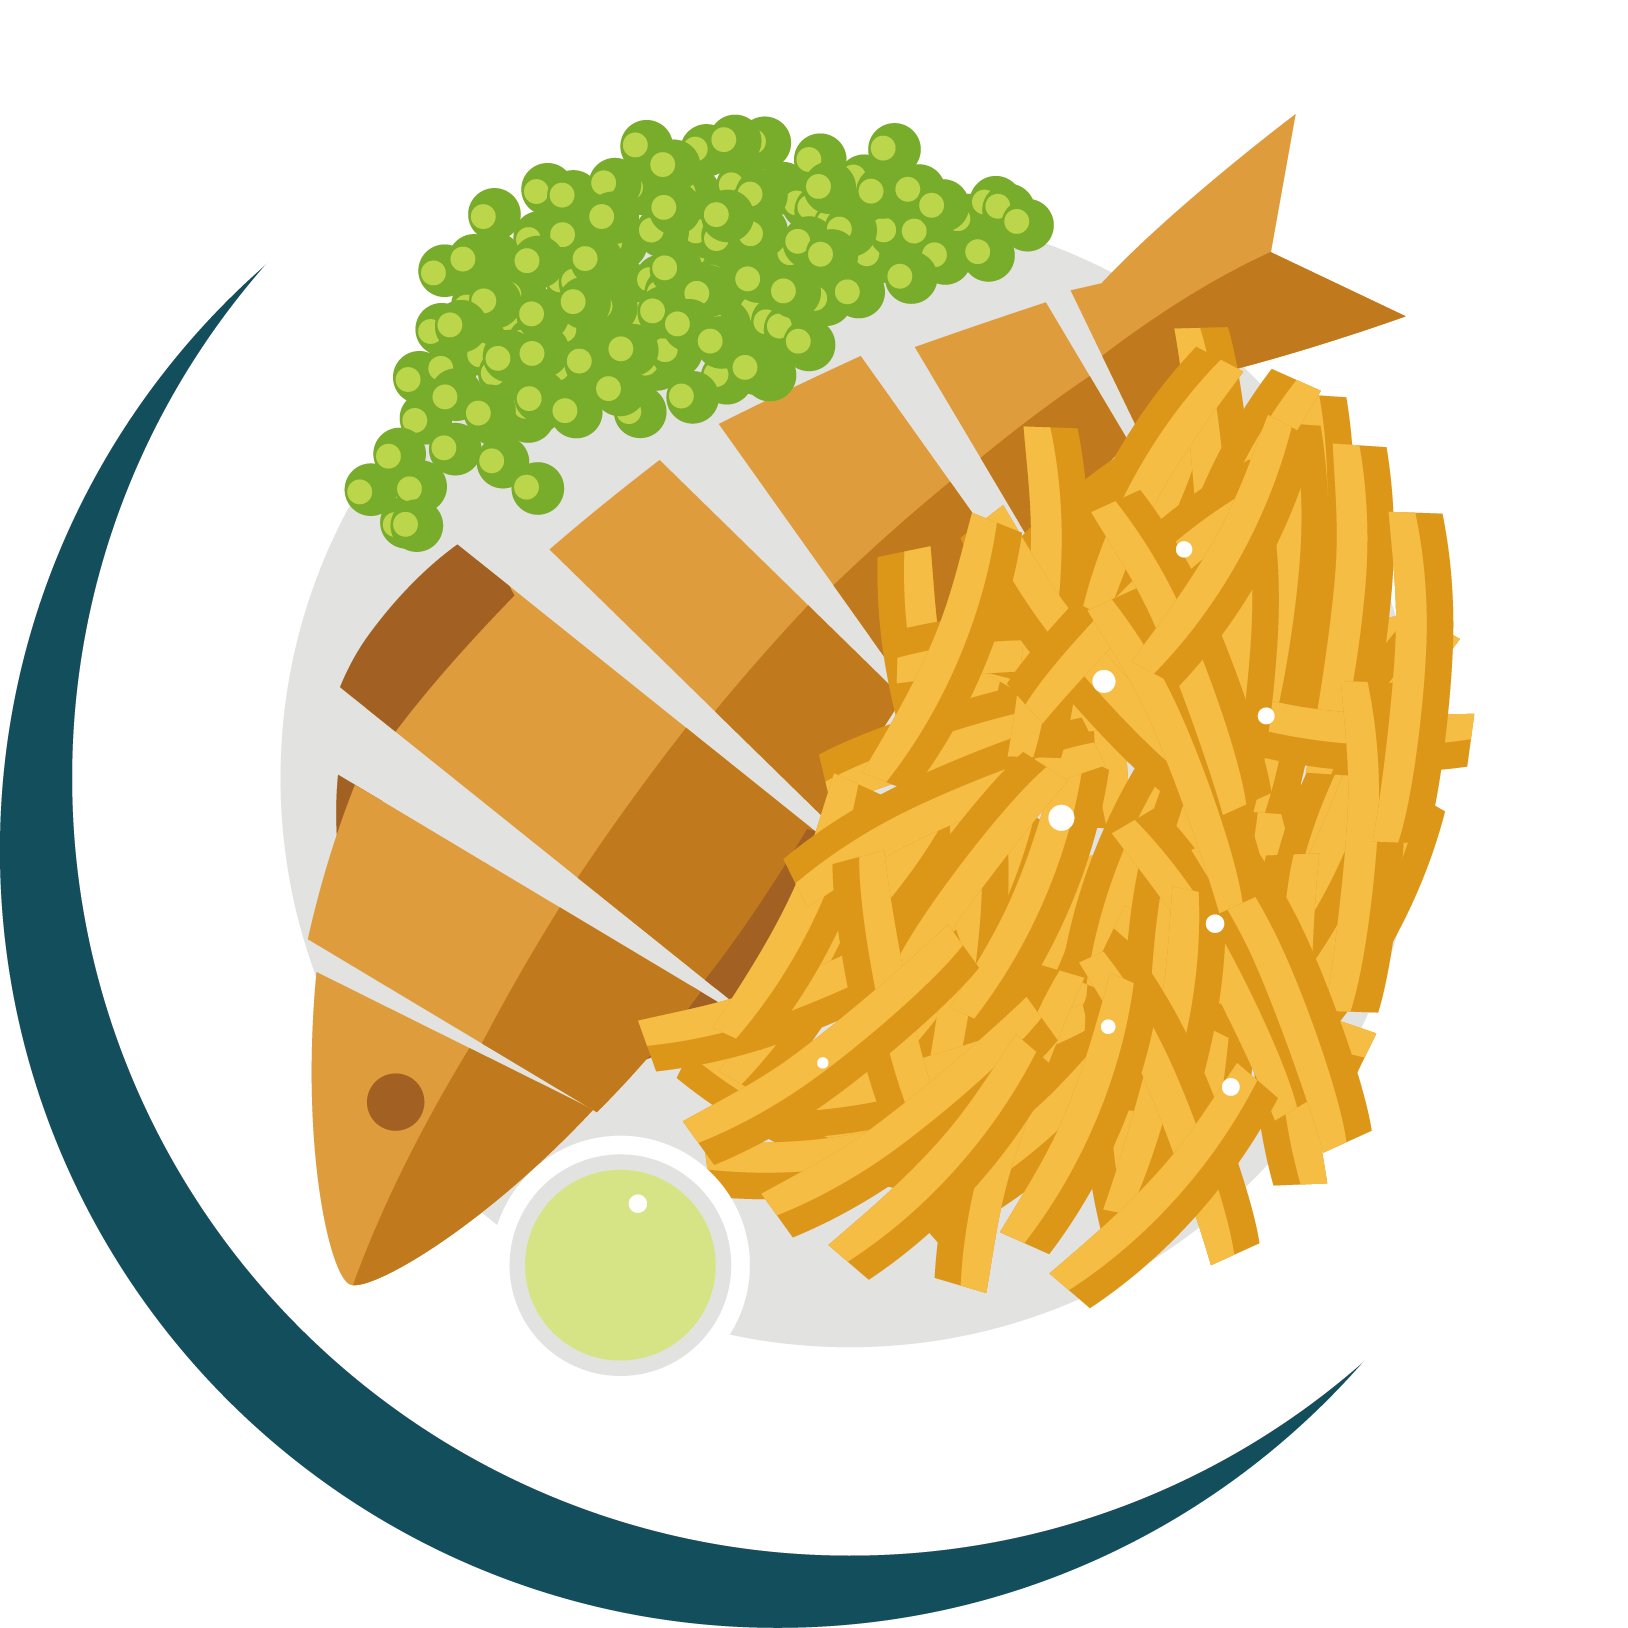 French Fries Fish And Chips Fried Fish English Cuisine - Fried Fish (1628x1628)